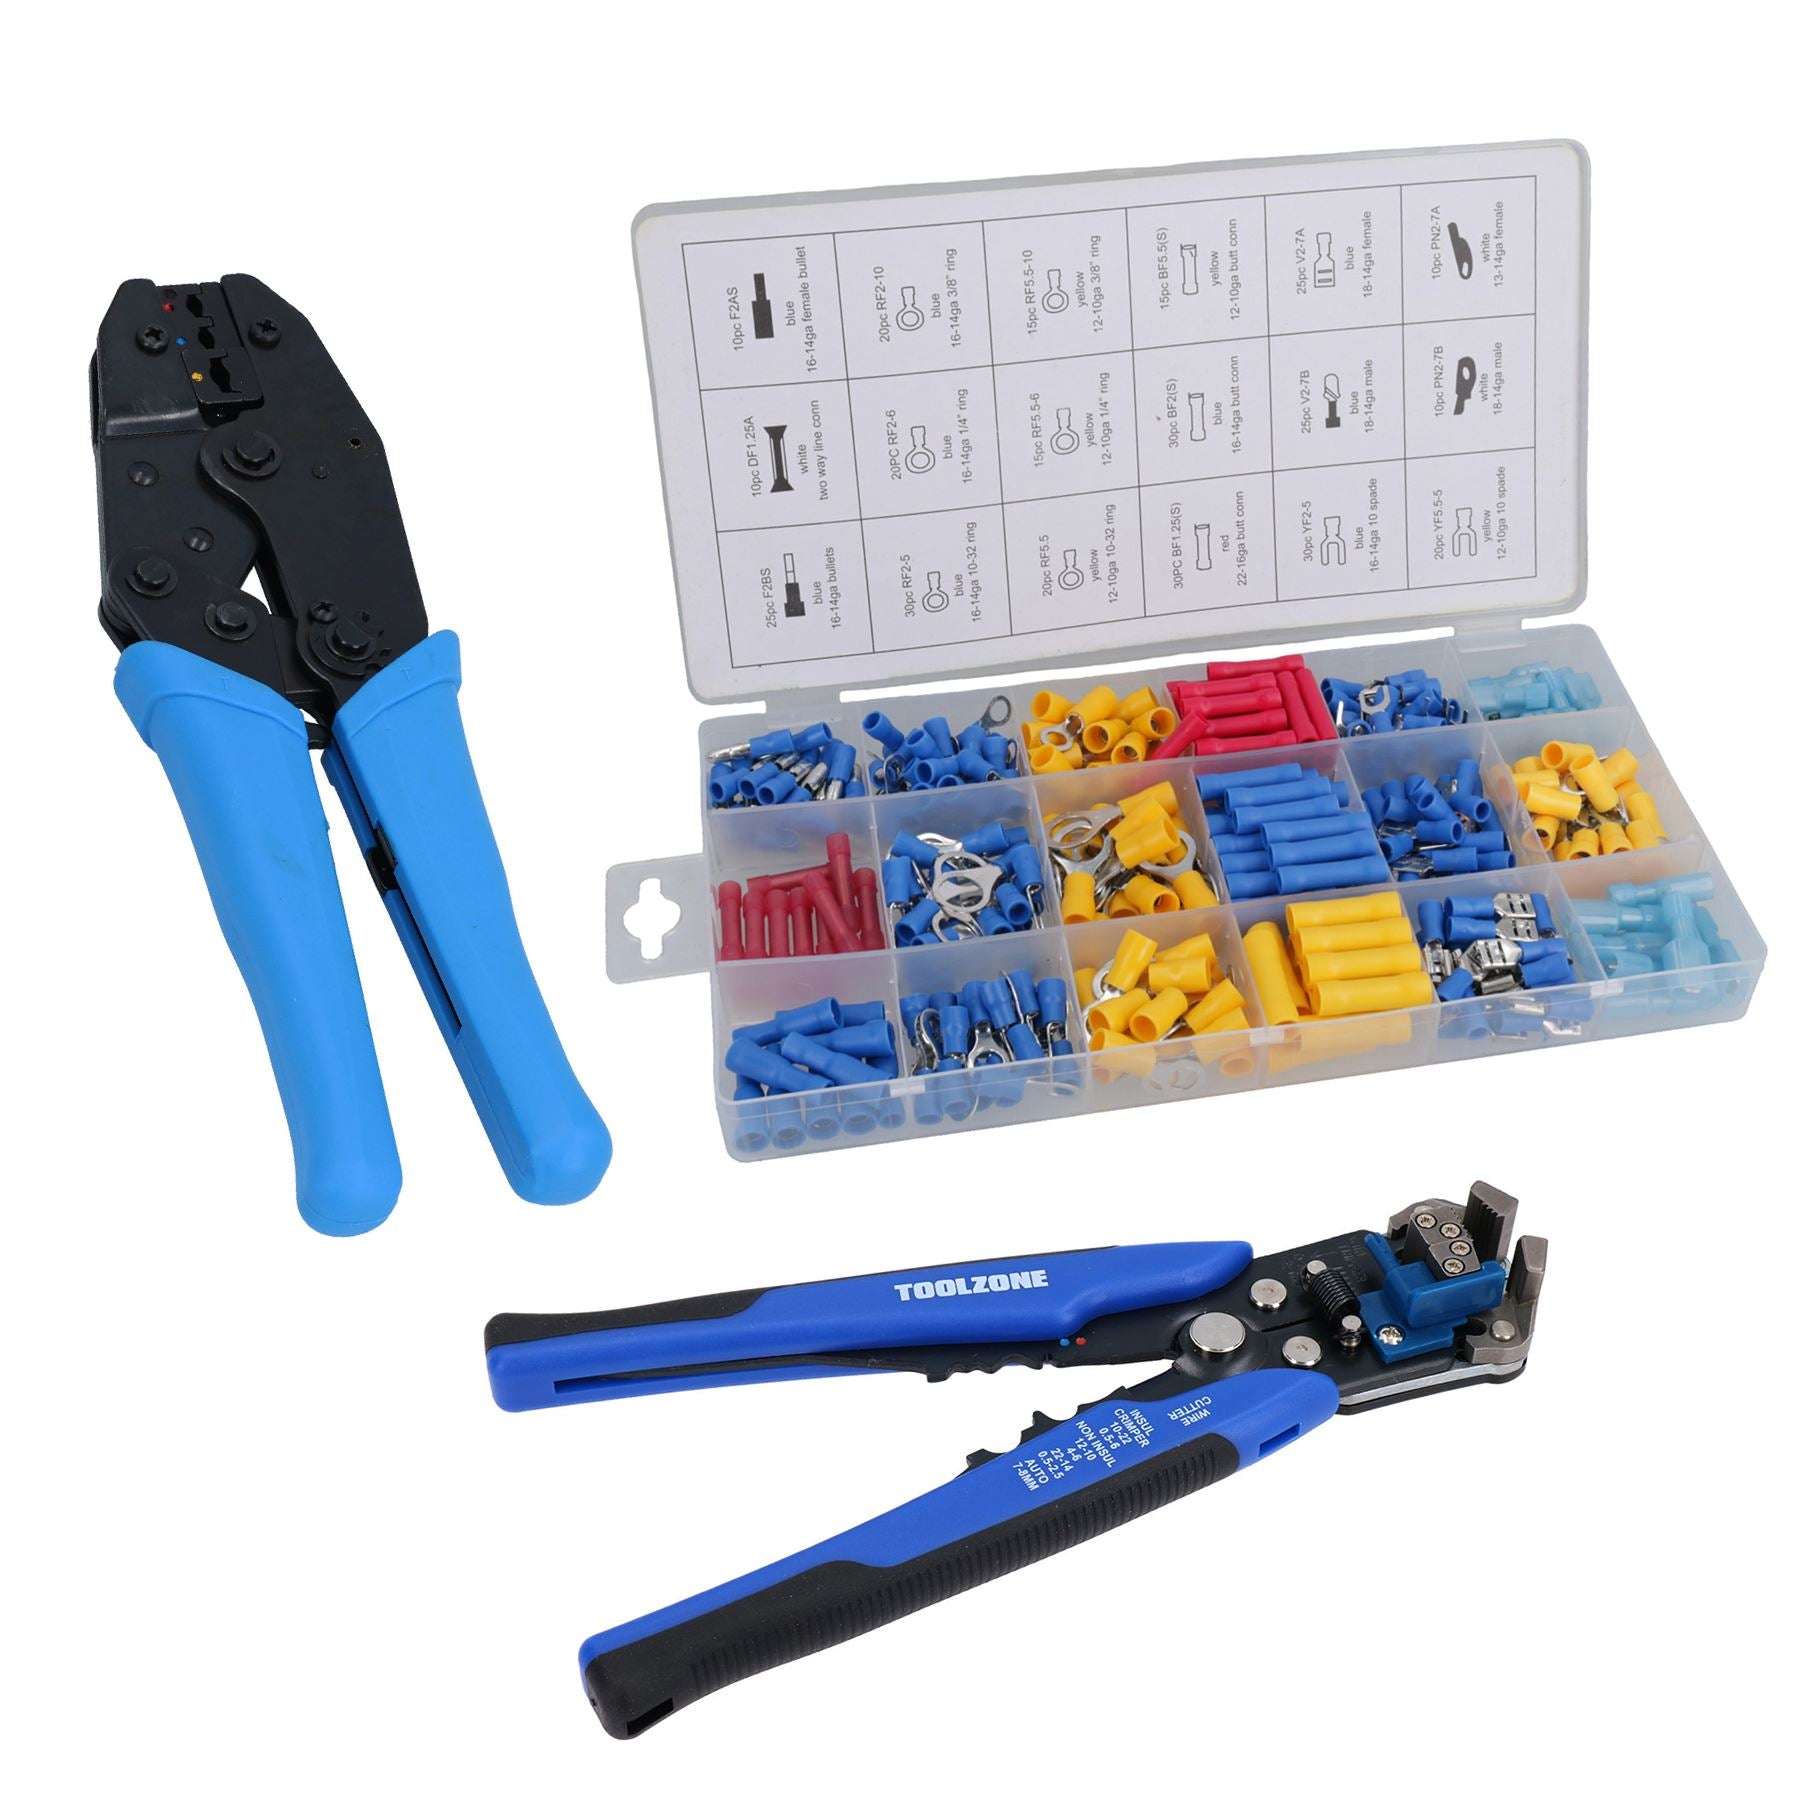 Electrical Wire Crimpers Strippers Pliers And Assorted Terminals Spades Butts